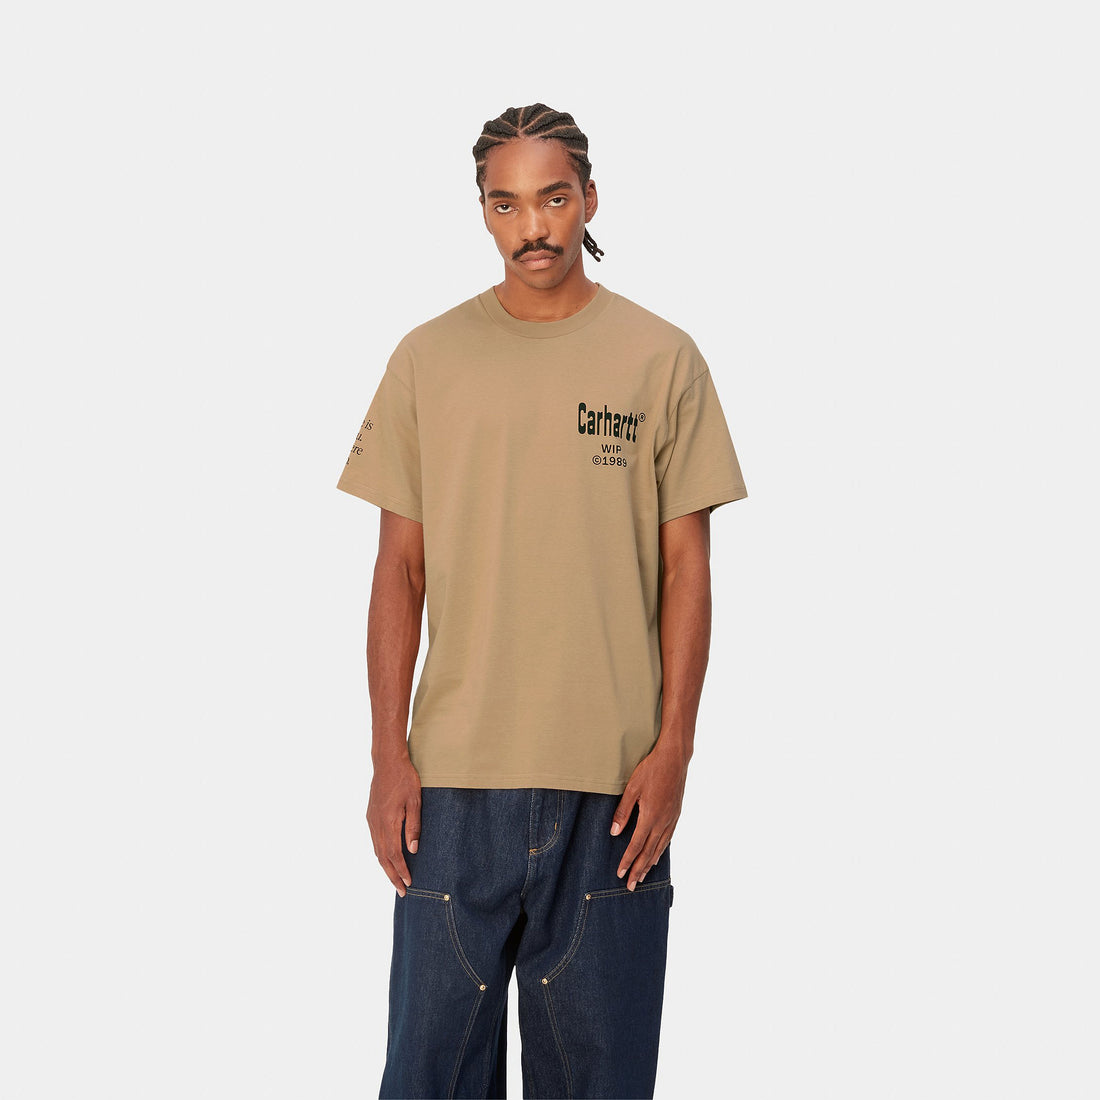 Carhartt WIP S/S Home T-Shirt (dusty H brown/black) - Blue Mountain Store